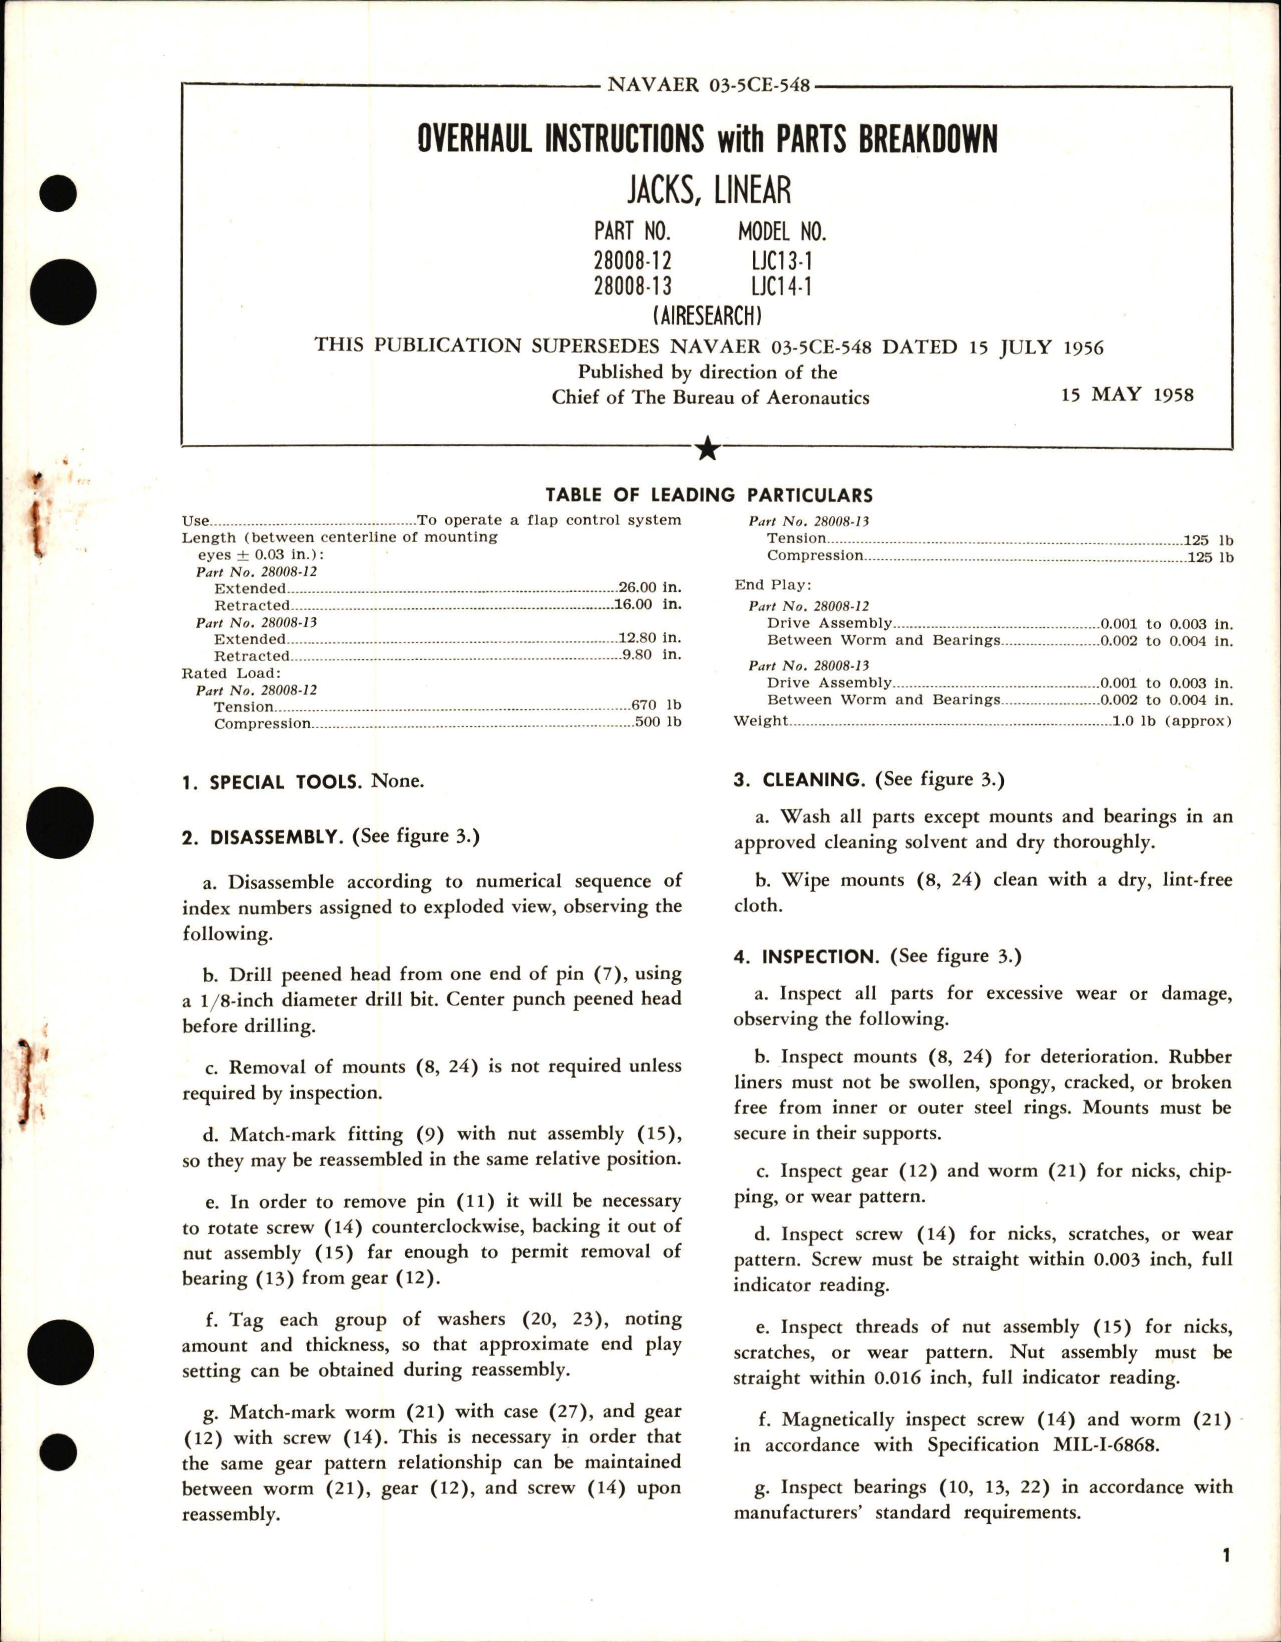 Sample page 1 from AirCorps Library document: Overhaul Instructions with Parts Breakdown for Jacks, Linear - Parts 28008-12 and 28008-13